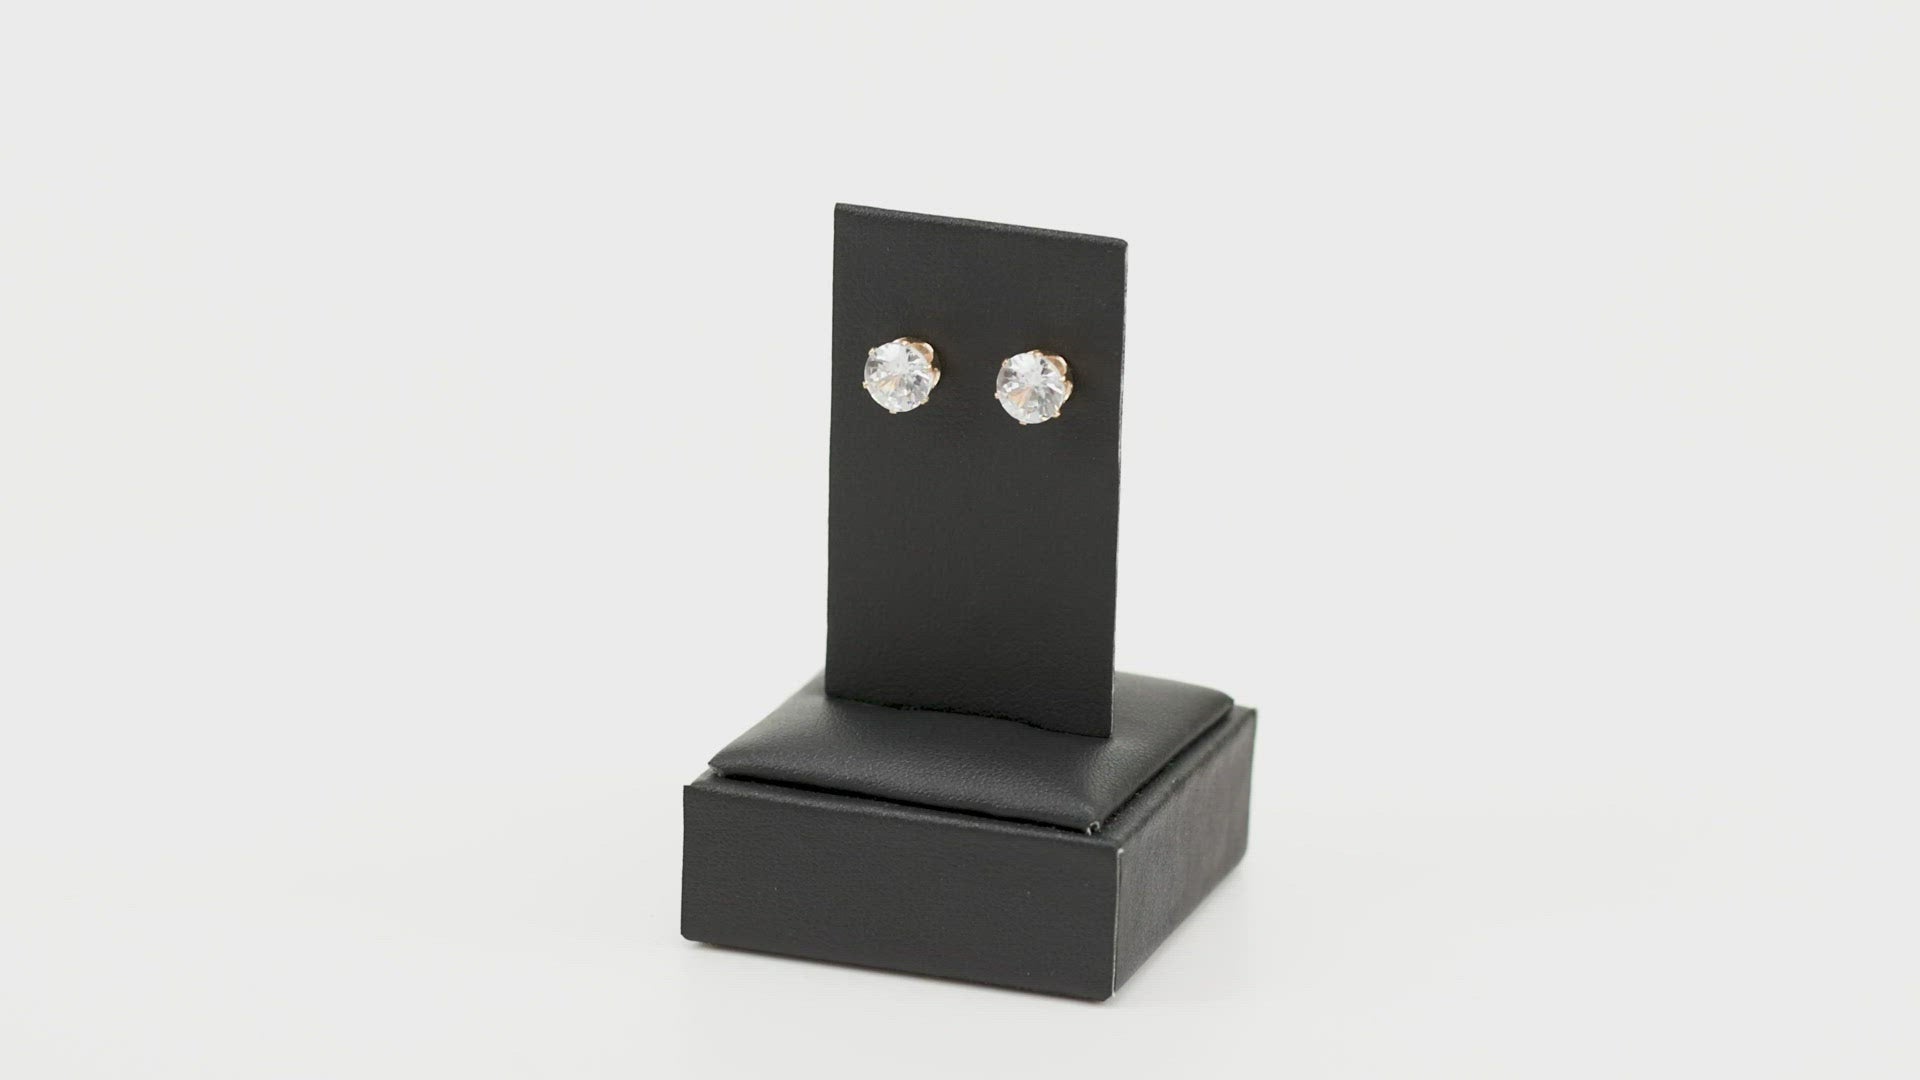 Just In TIMELESS - Gold Earrings - Paparazzi Accessories 
A sparkling white rhinestone is nestled inside a classic gold frame for a timeless look. Earring attaches to a standard post fitting. Sold as one pair of post earrings.
